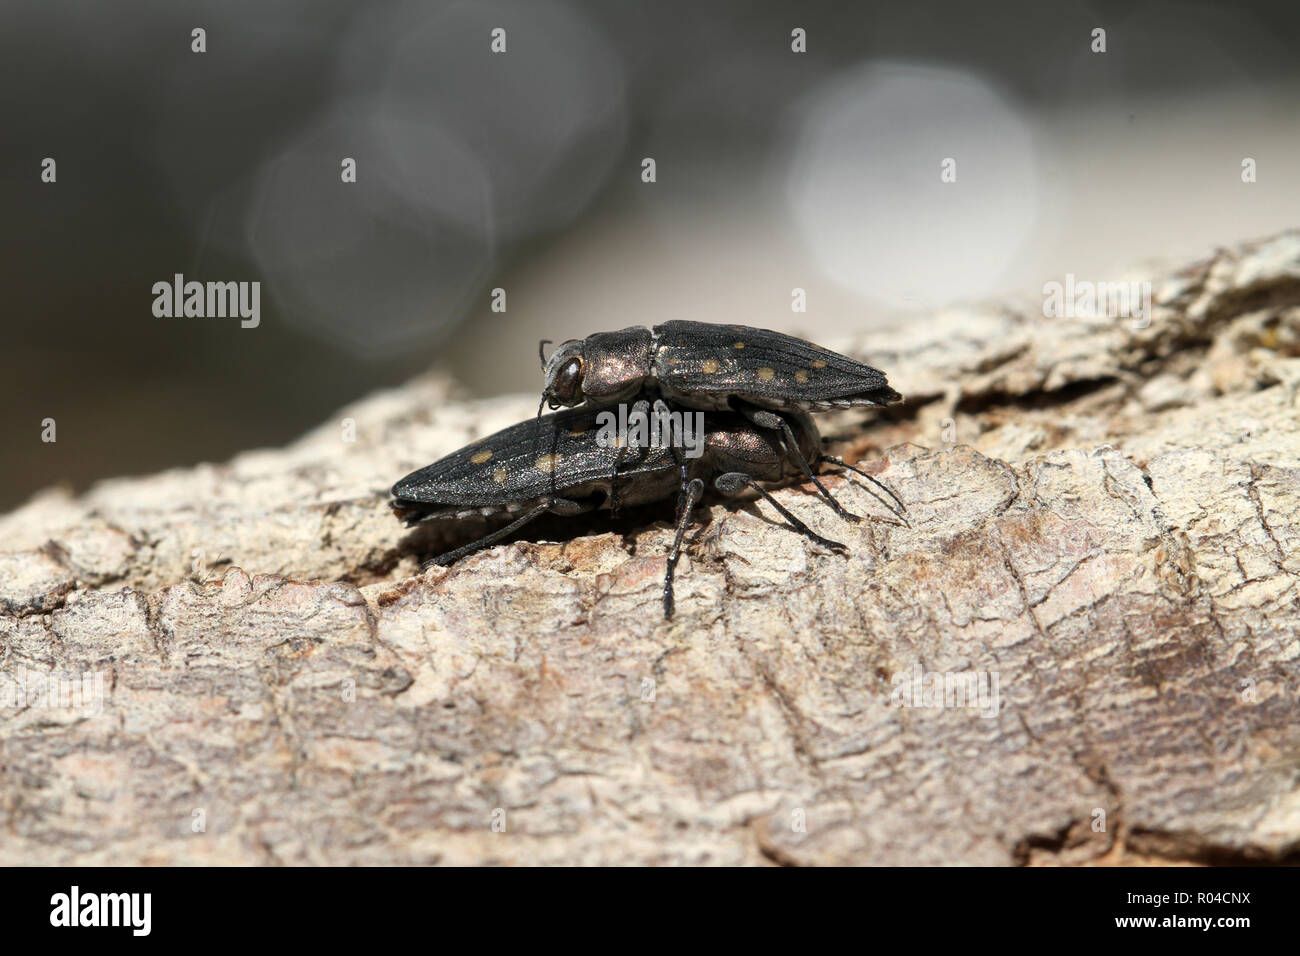 Two Coleopteras on a piece of wood Stock Photo